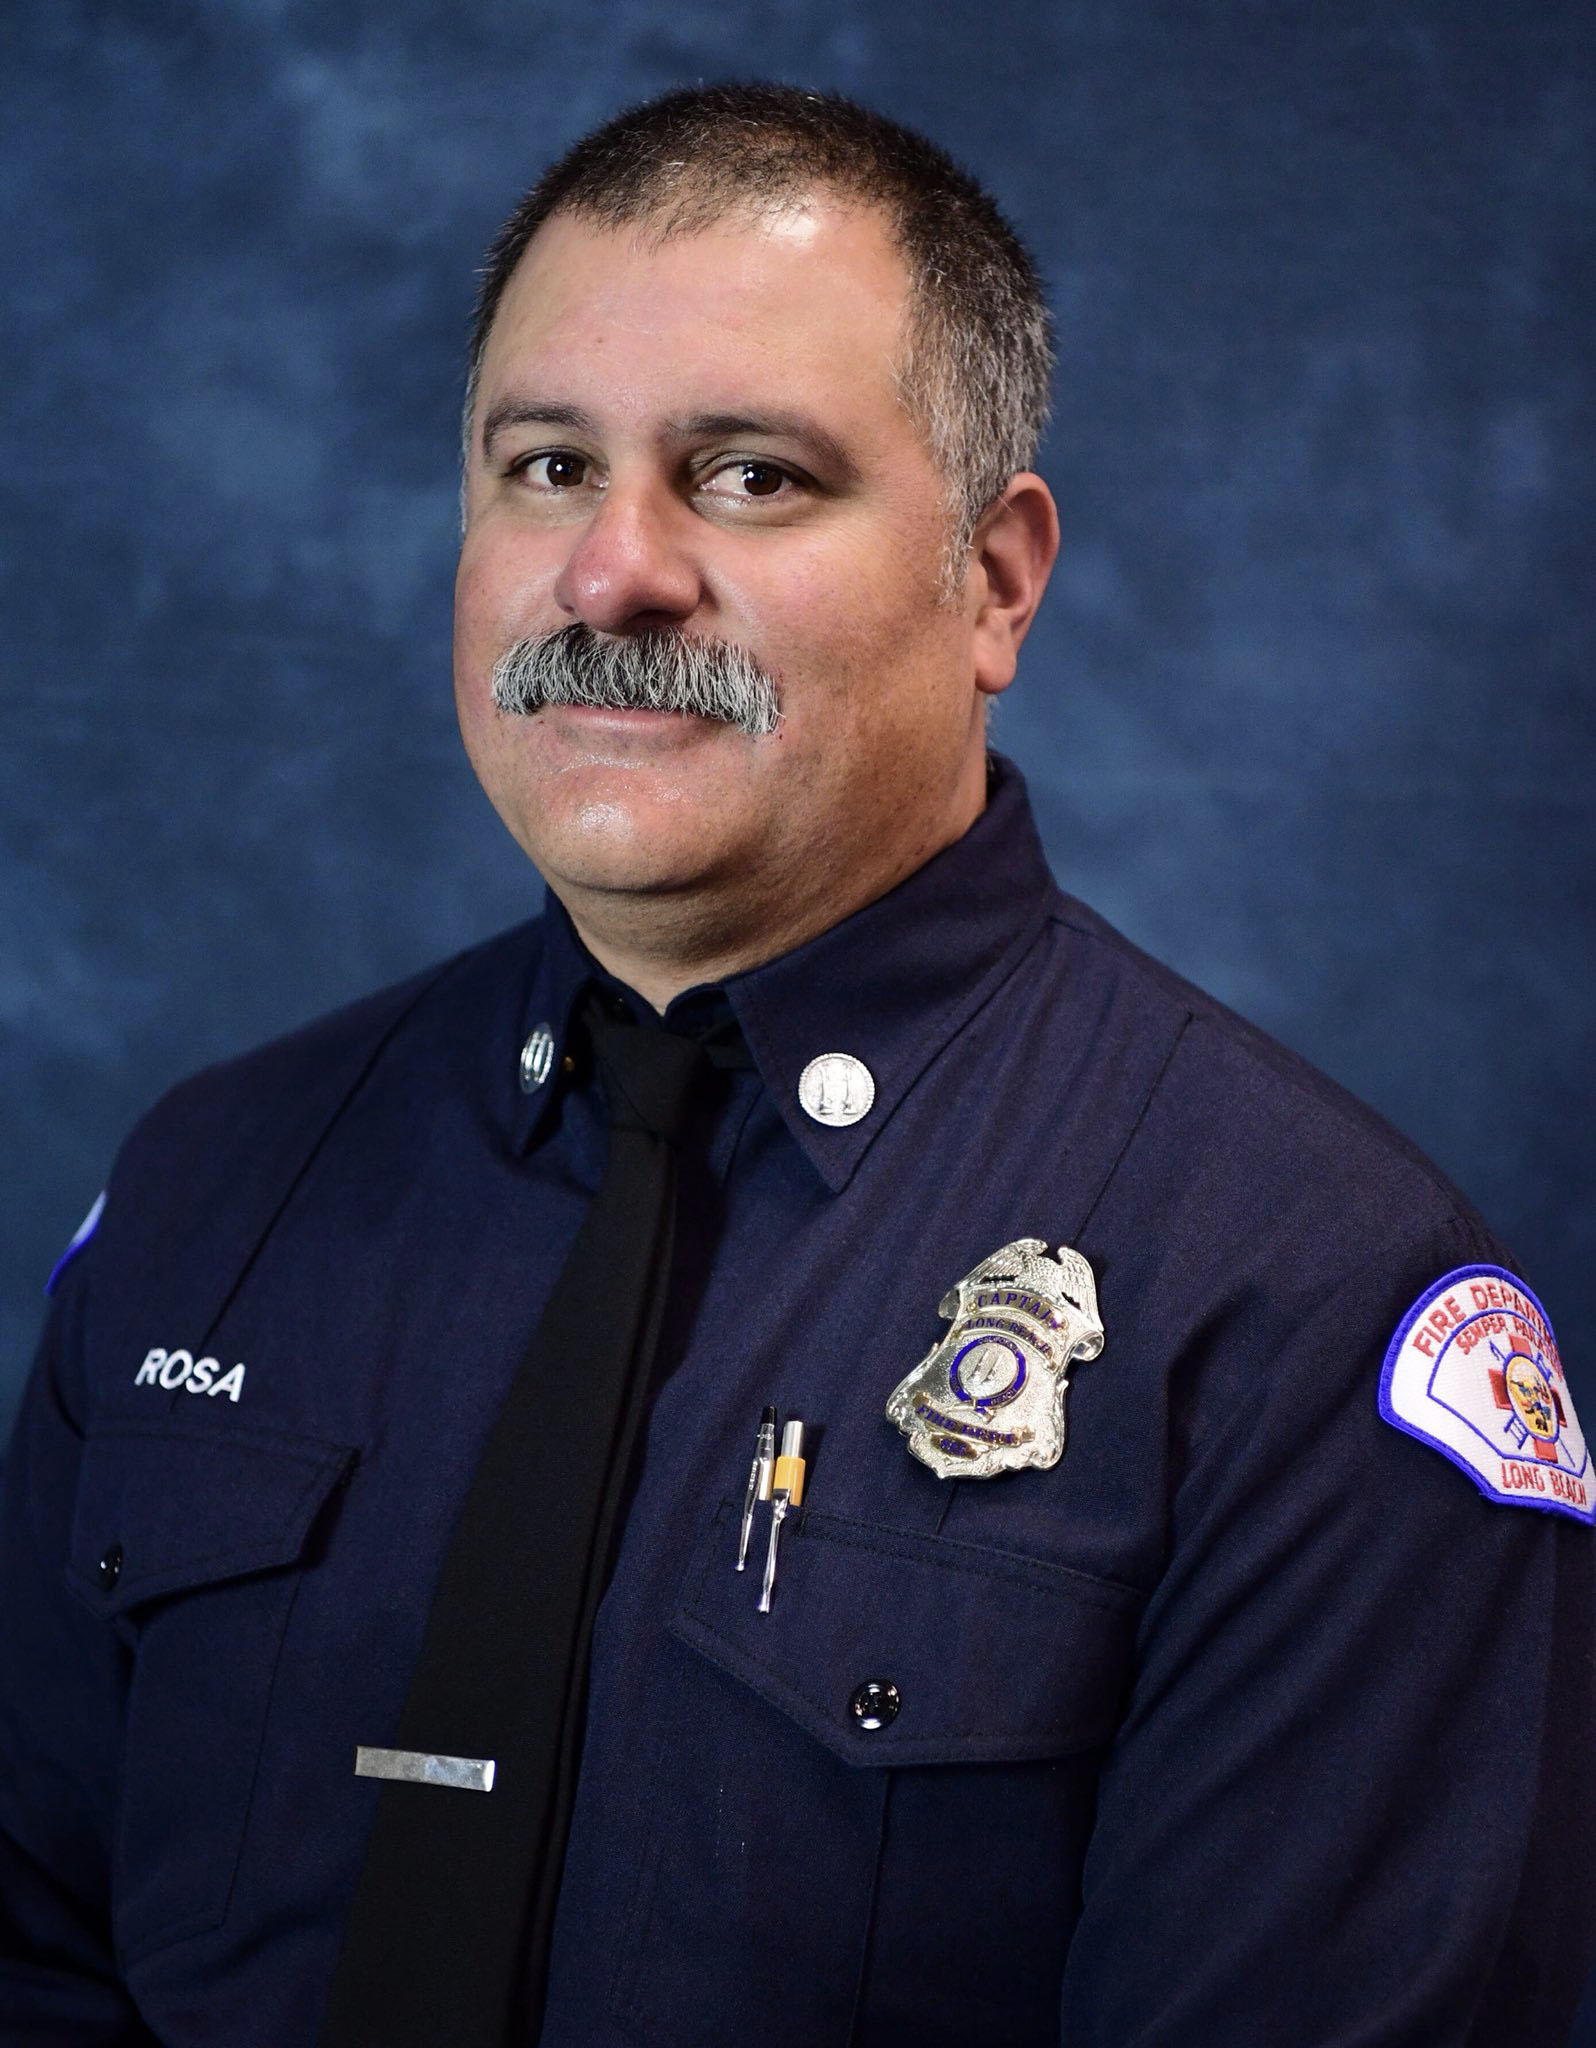 PHOTO: Captain David Rosa, a Long Beach, California firefighter, died from injuries sustained from a gunshot wound on June 25, 2018.